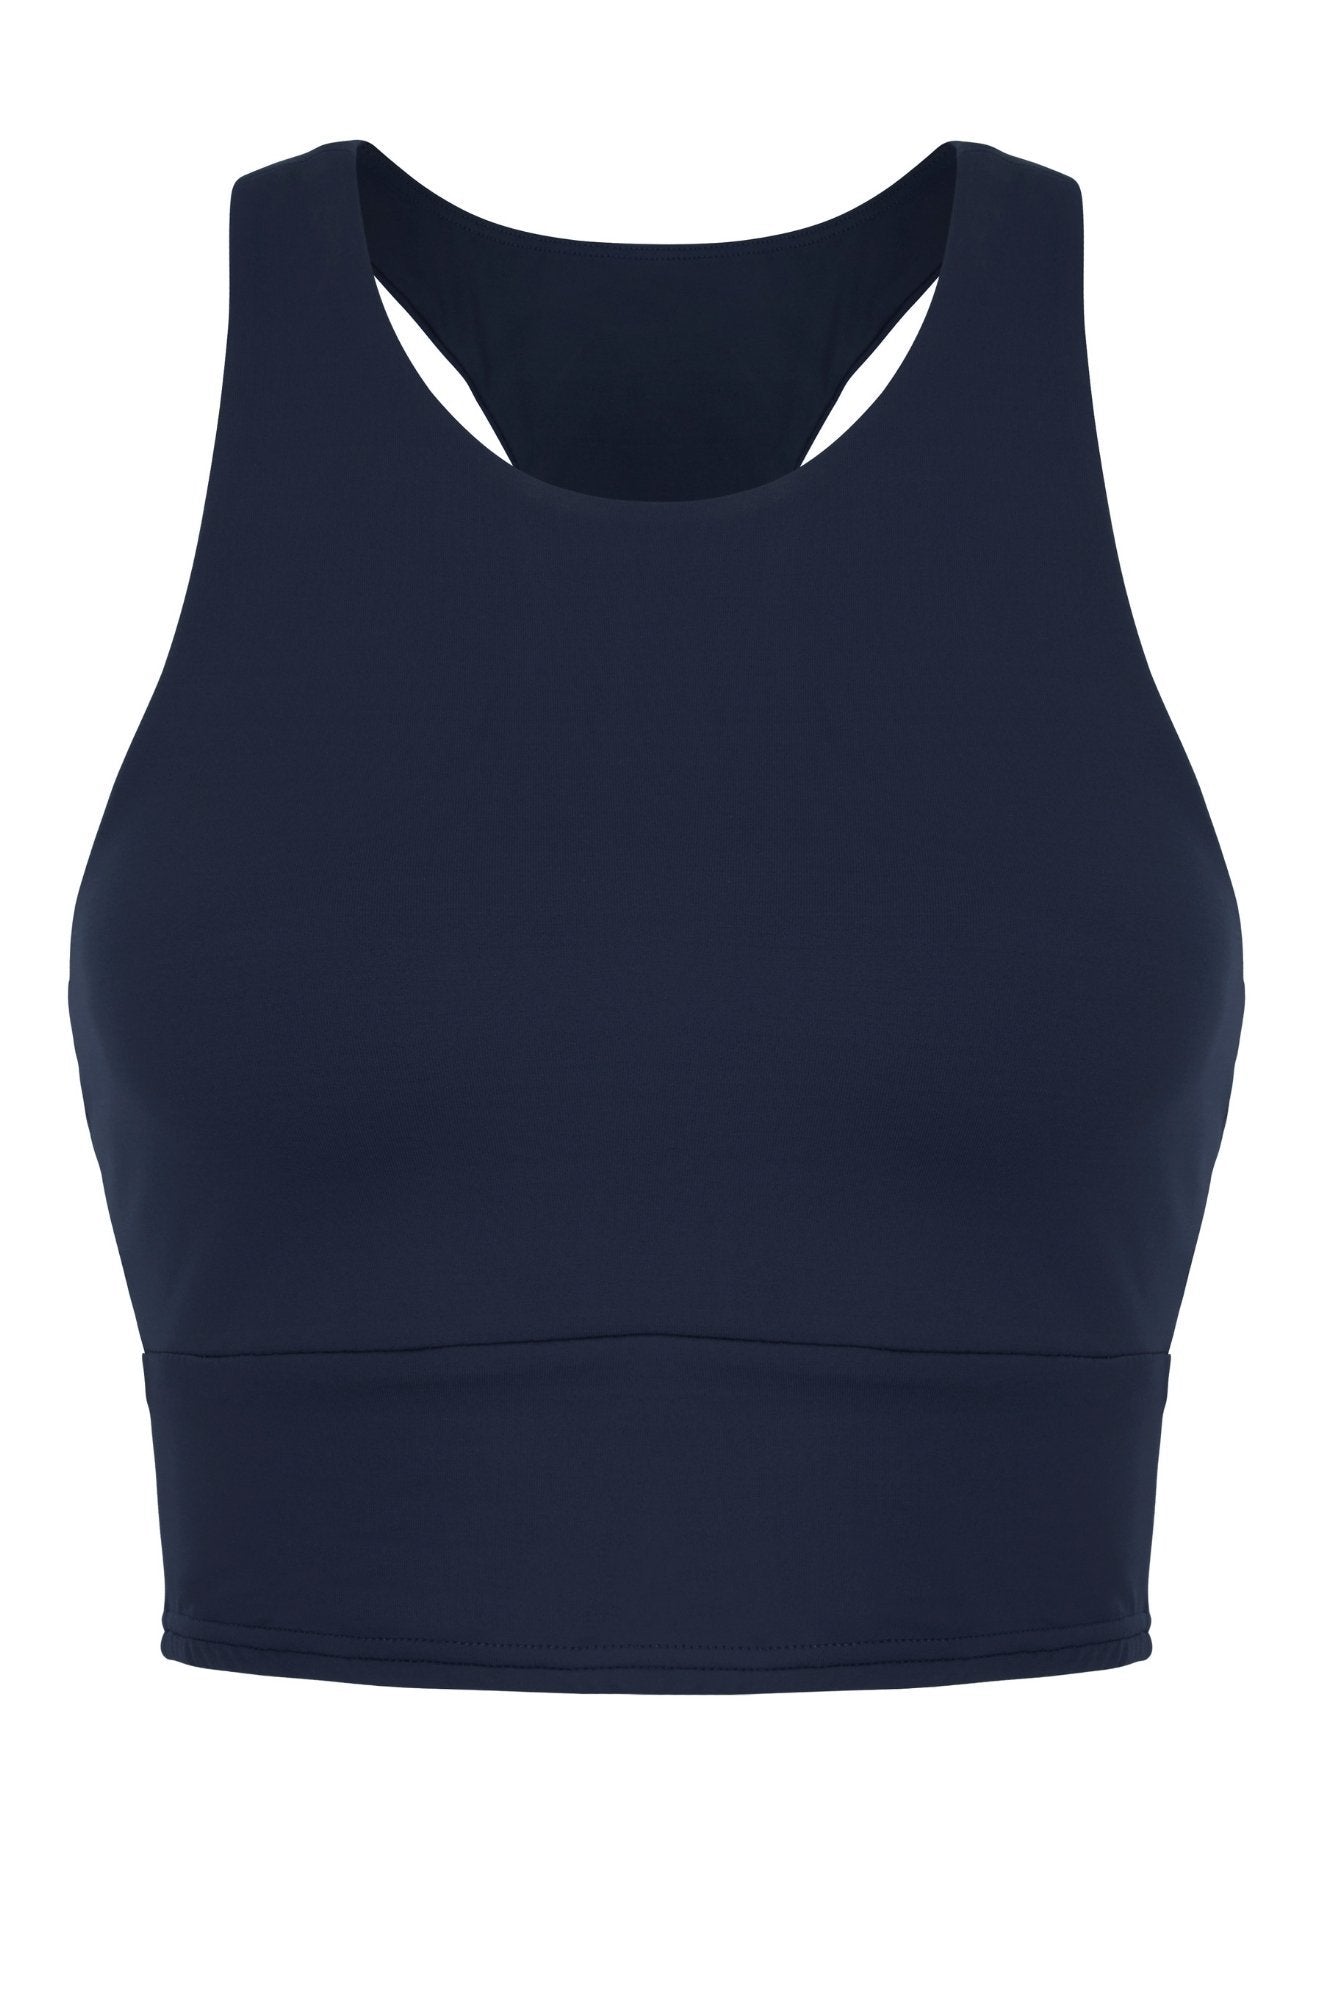 Longline Navy Crop Bra with Removable Padding and Full Coverage by Born Nouli